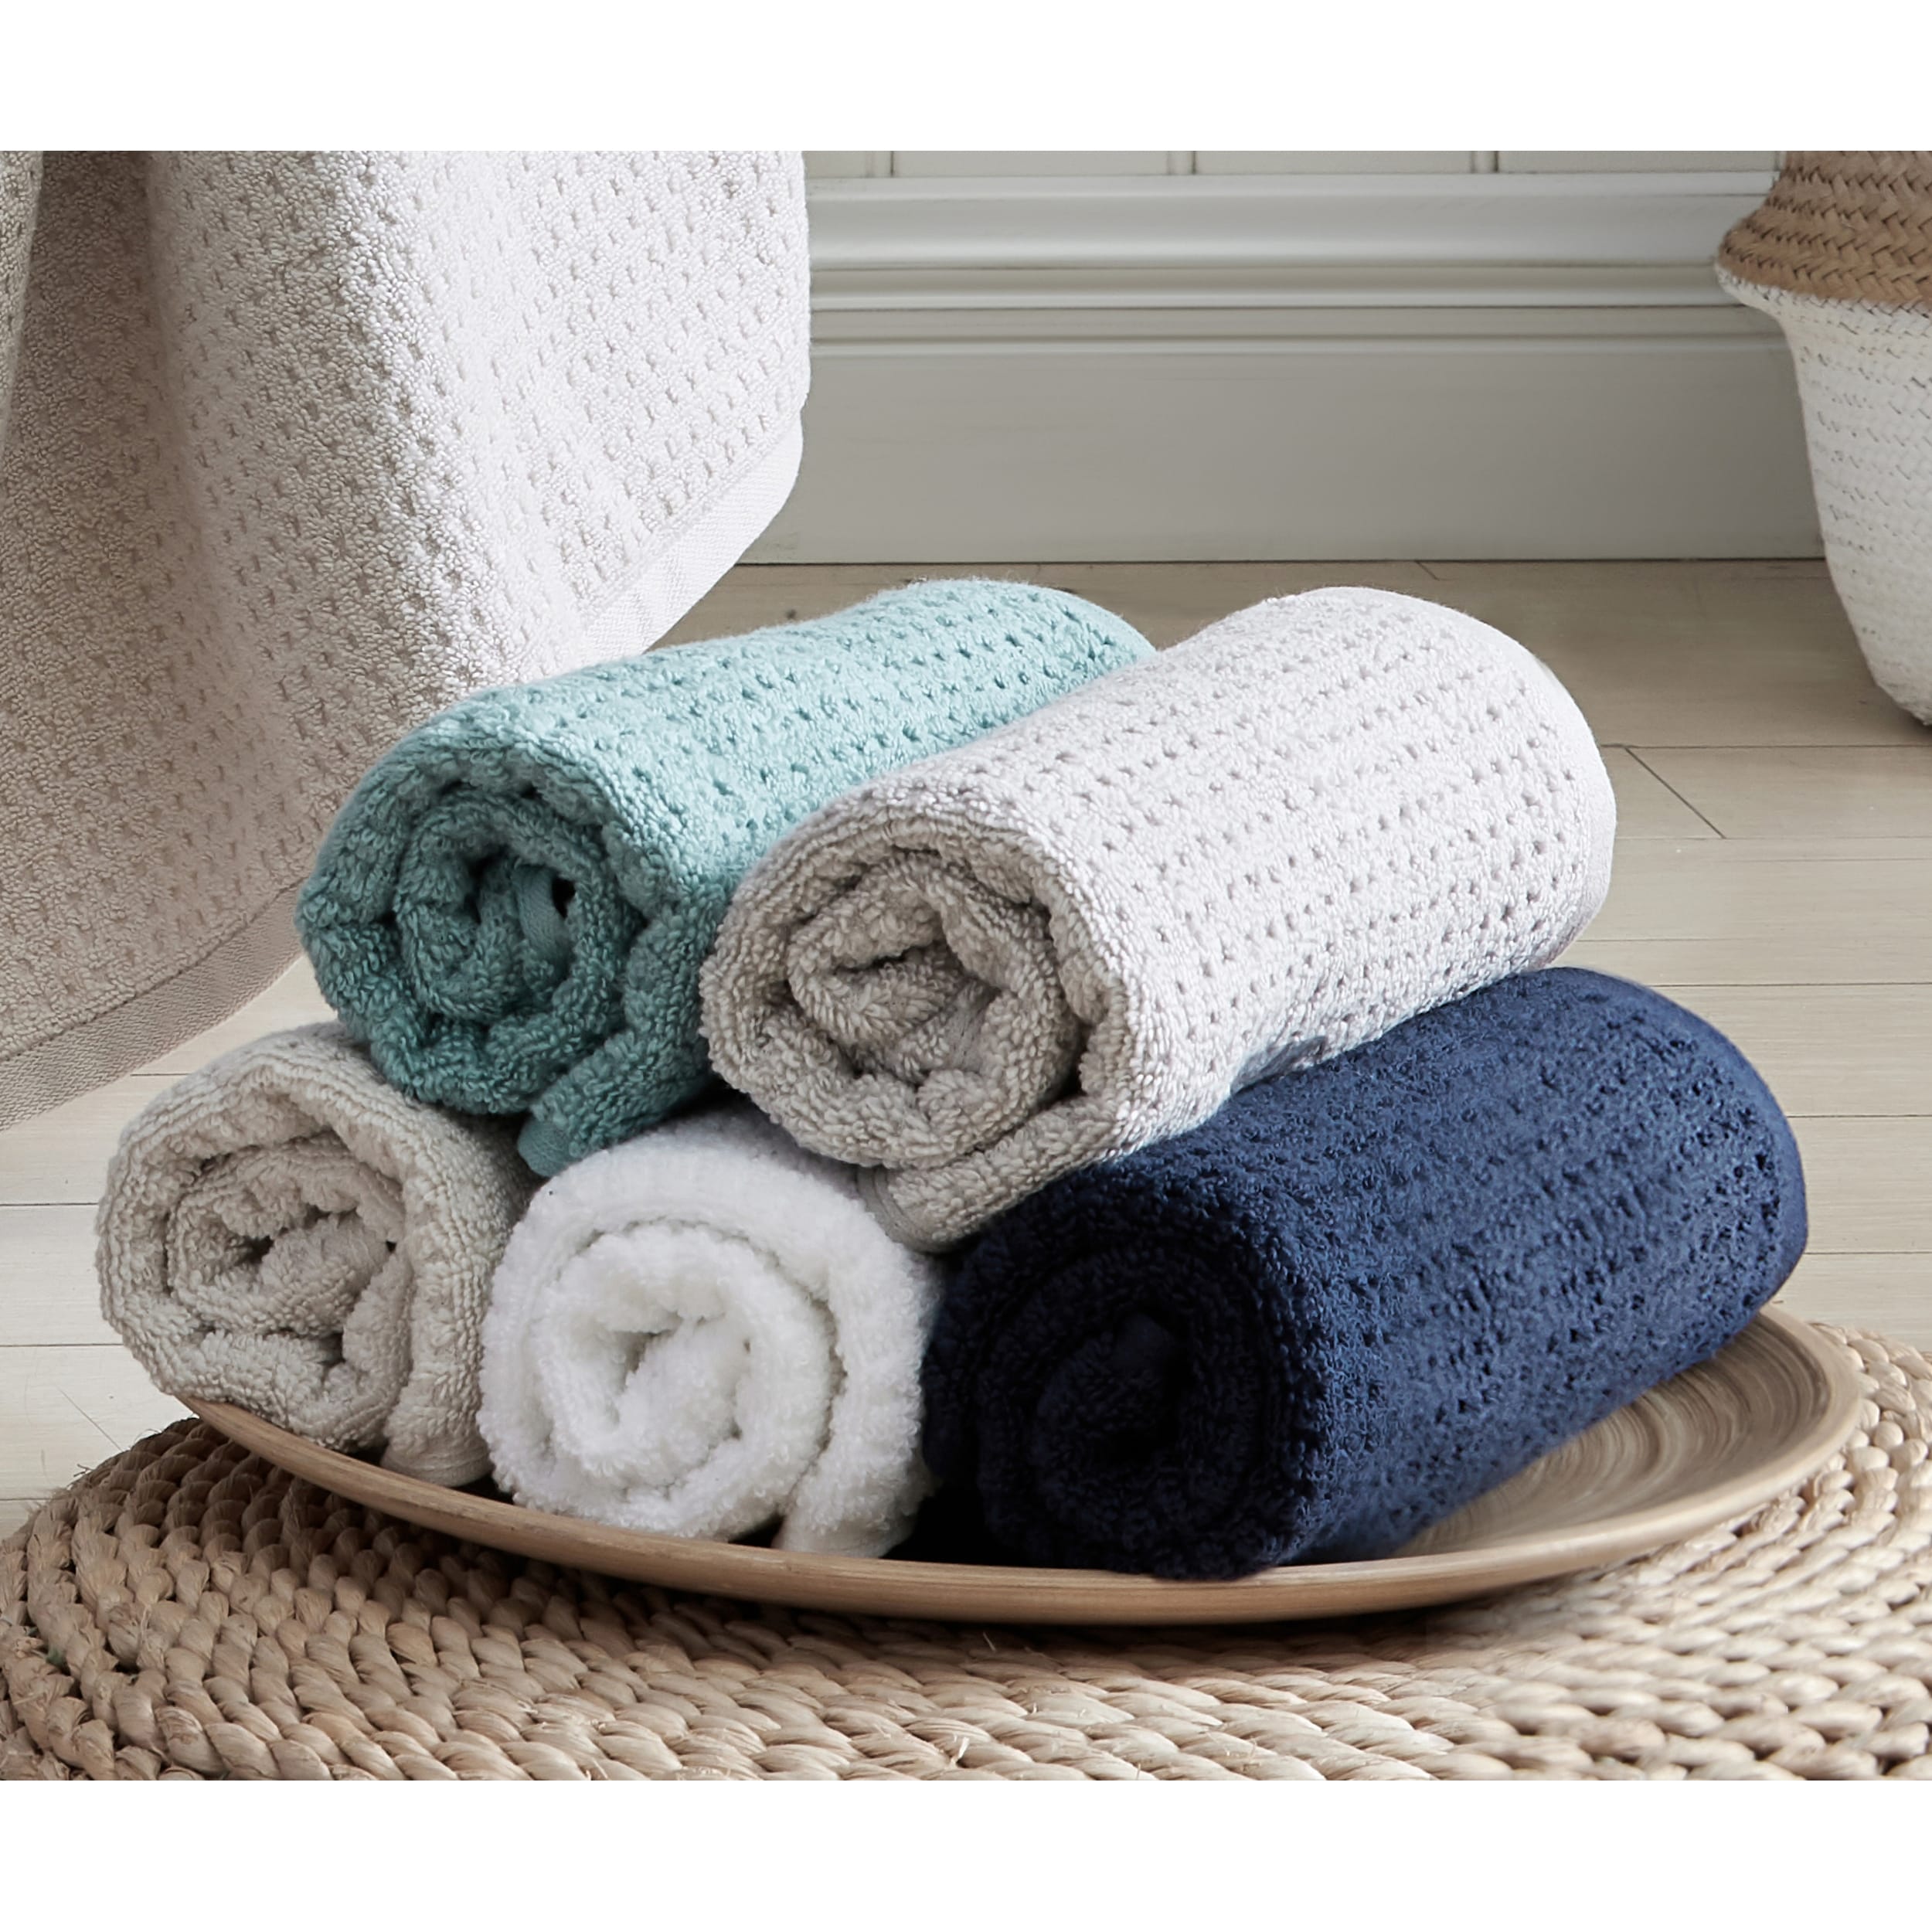 https://ak1.ostkcdn.com/images/products/is/images/direct/c4e600449649686f8ae3fe98bec1ee3c2b919f9b/Tommy-Bahama-Northern-Pacific-Cotton-6-Piece-Towel-Set.jpg